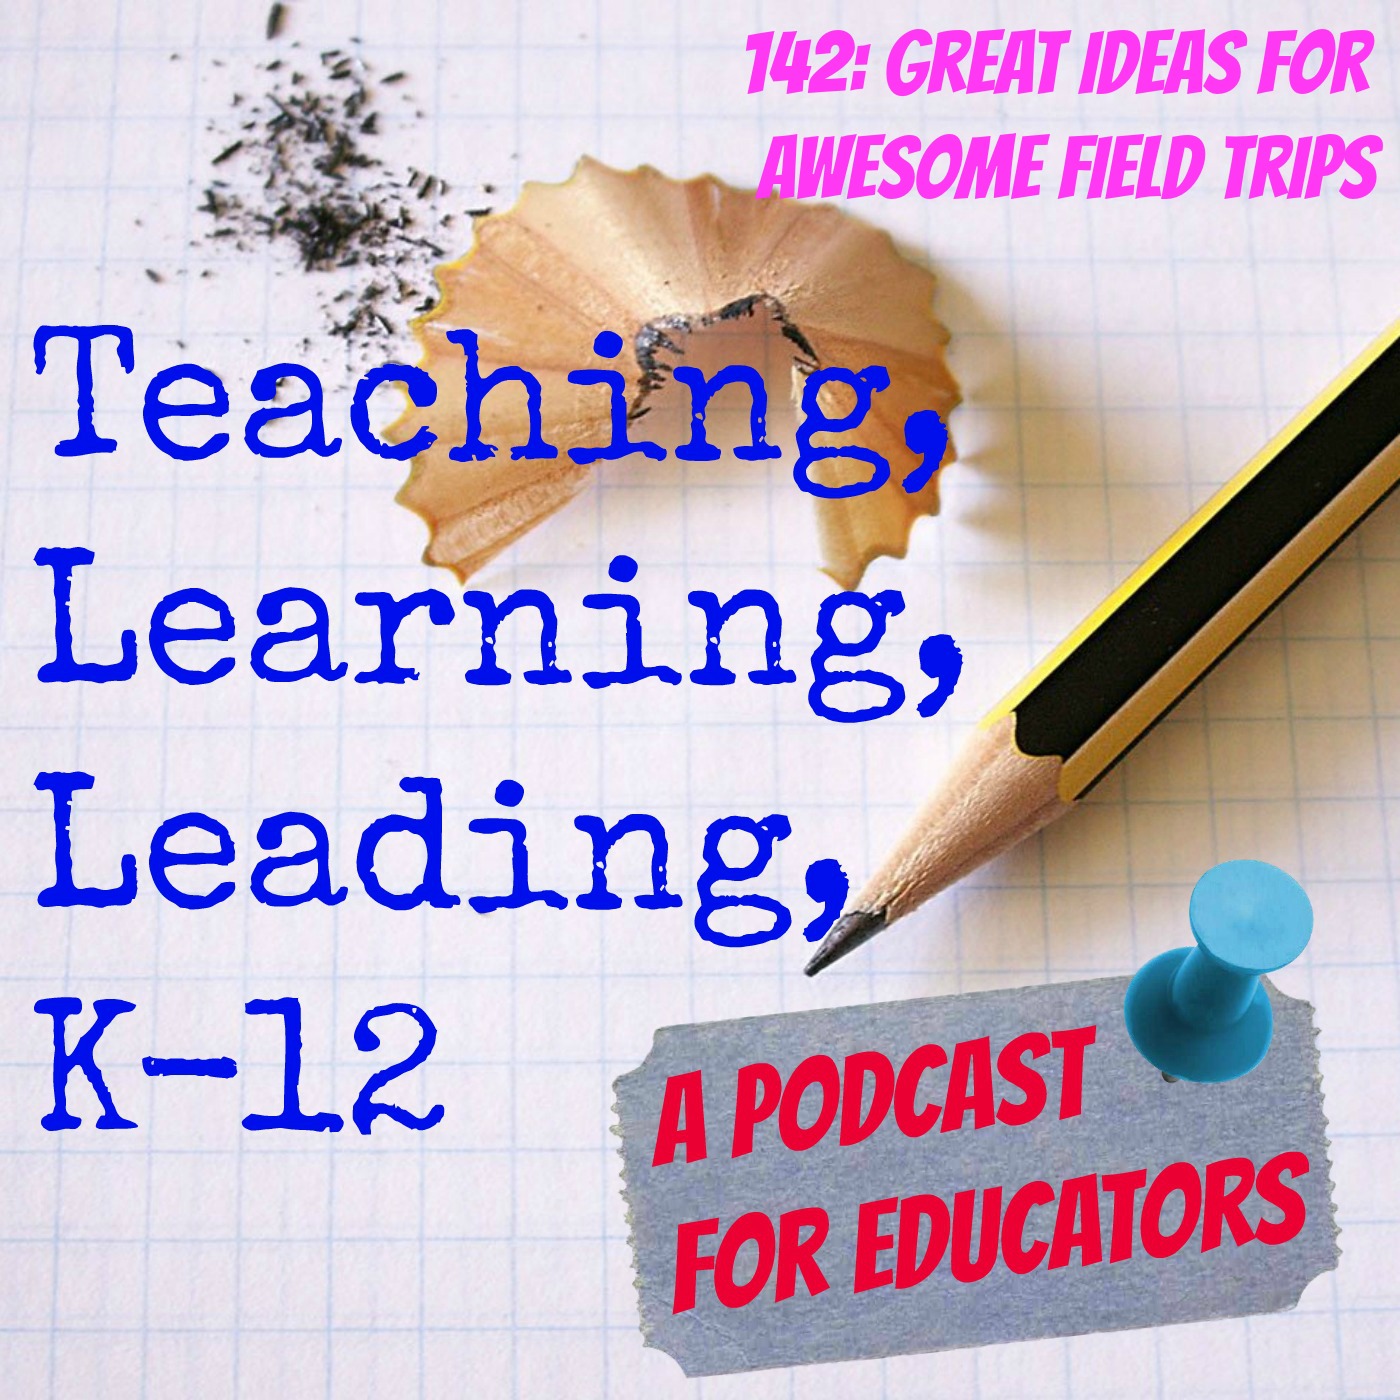 142: Great Ideas for Awesome Field Trips